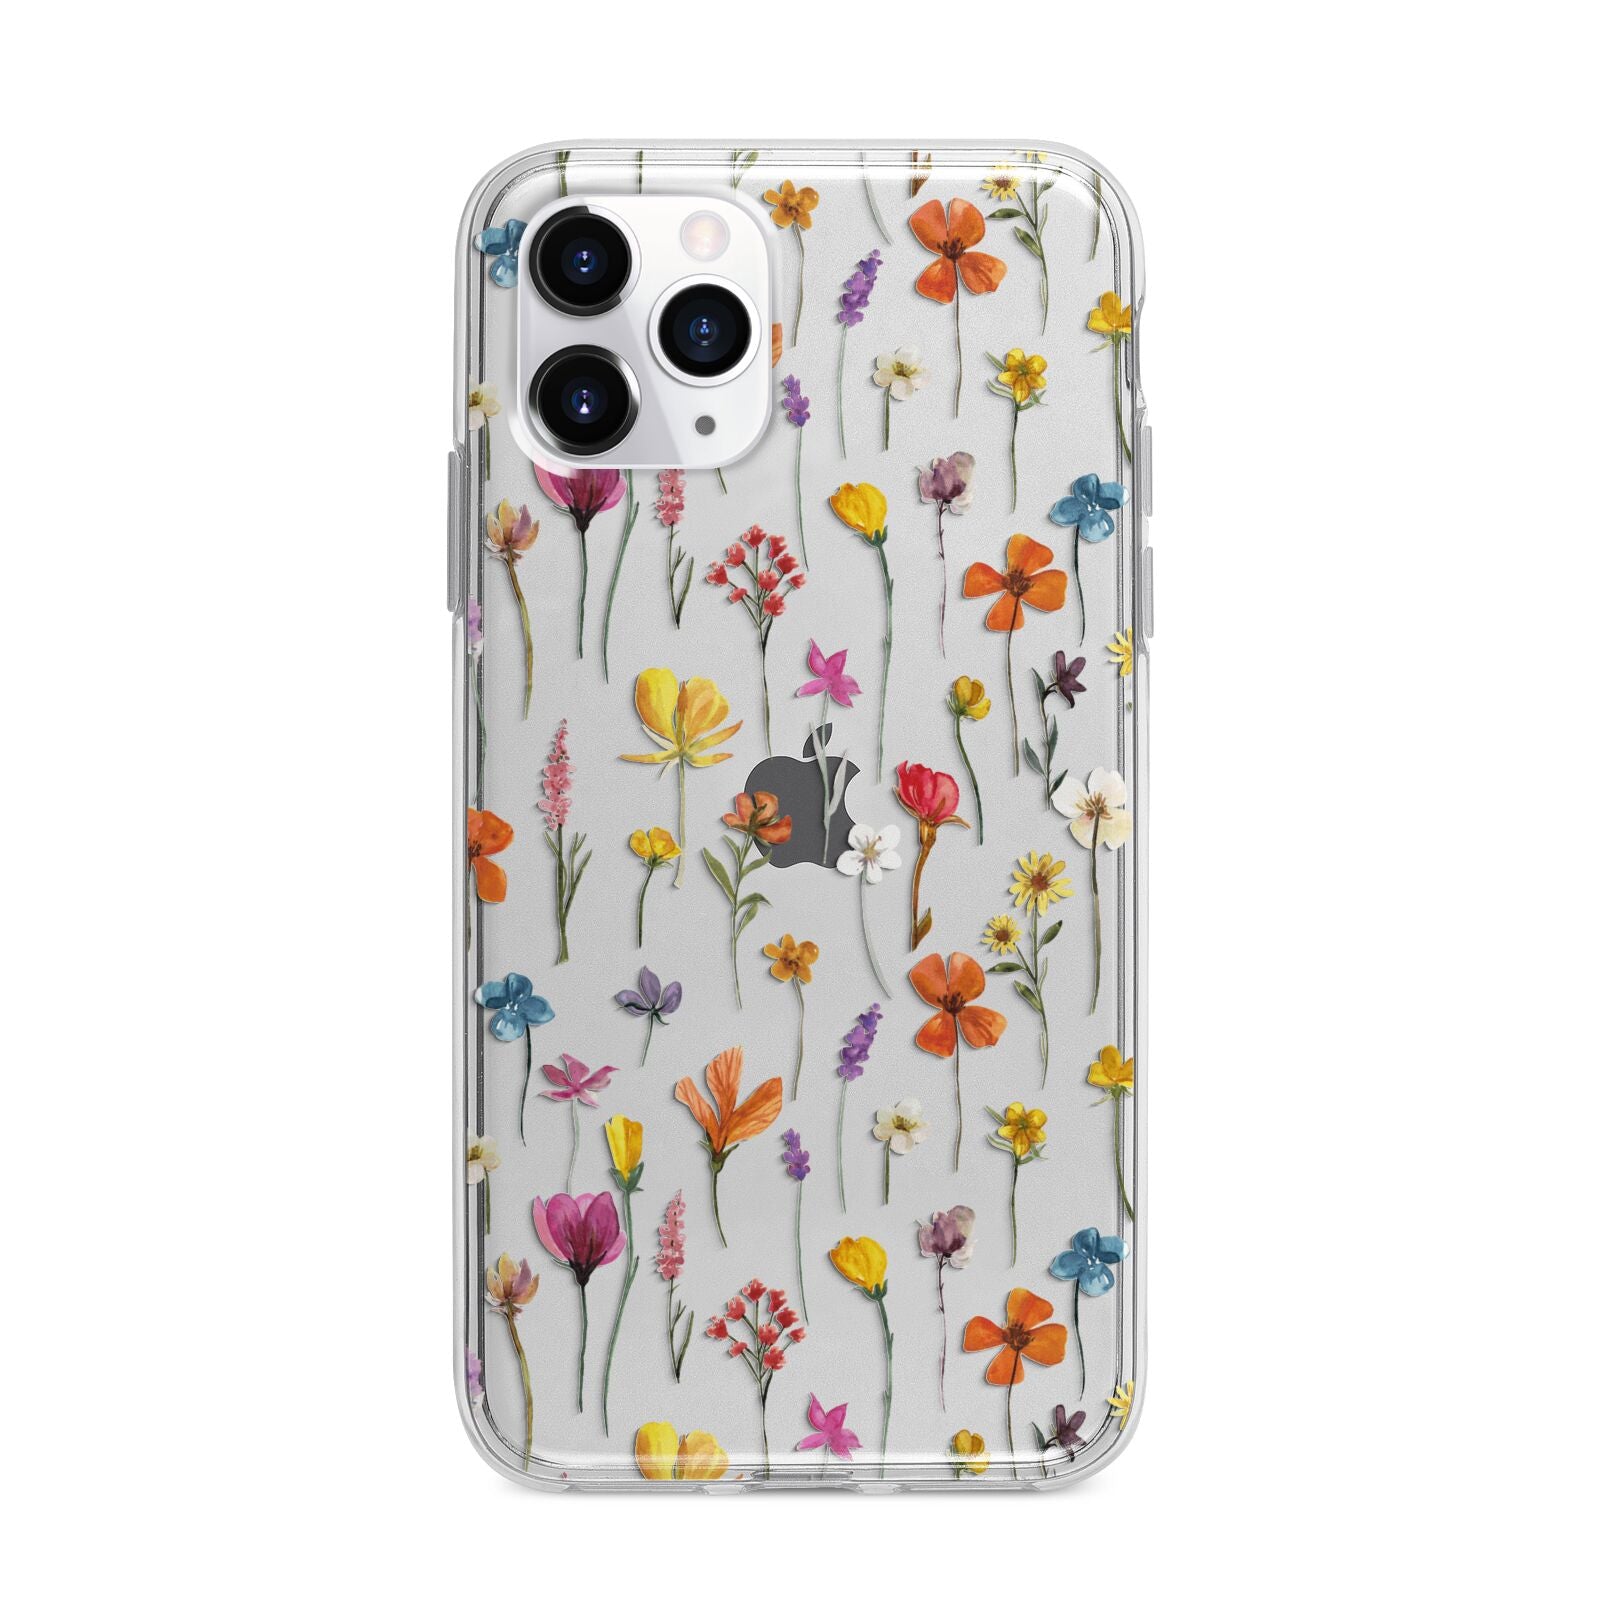 Botanical Floral Apple iPhone 11 Pro Max in Silver with Bumper Case